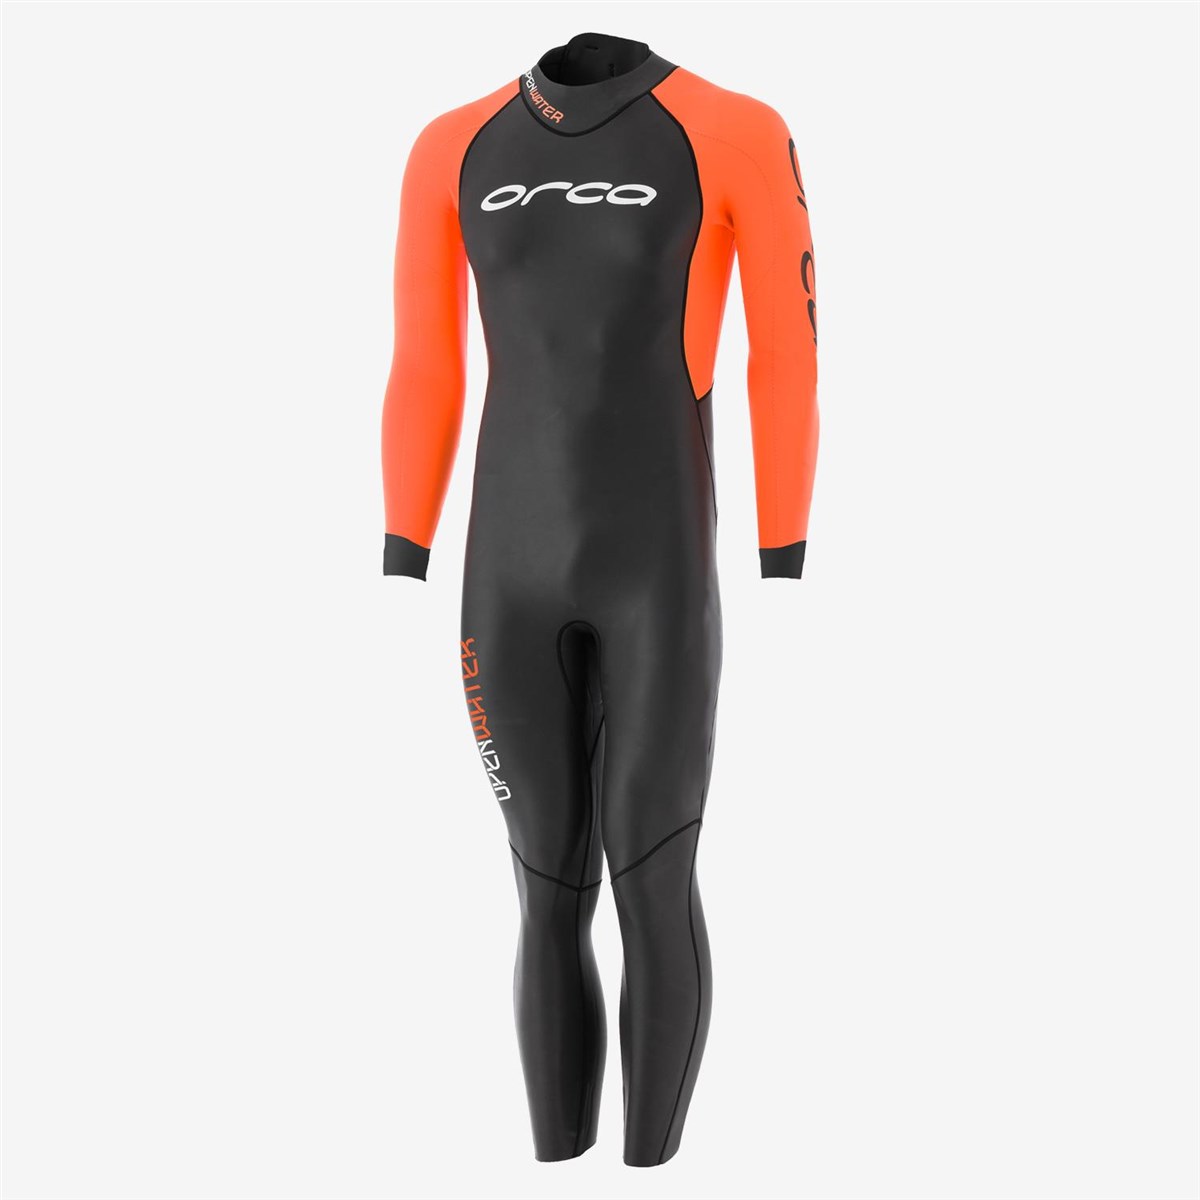 Orca Openwater Full Sleeve Wetsuit product image